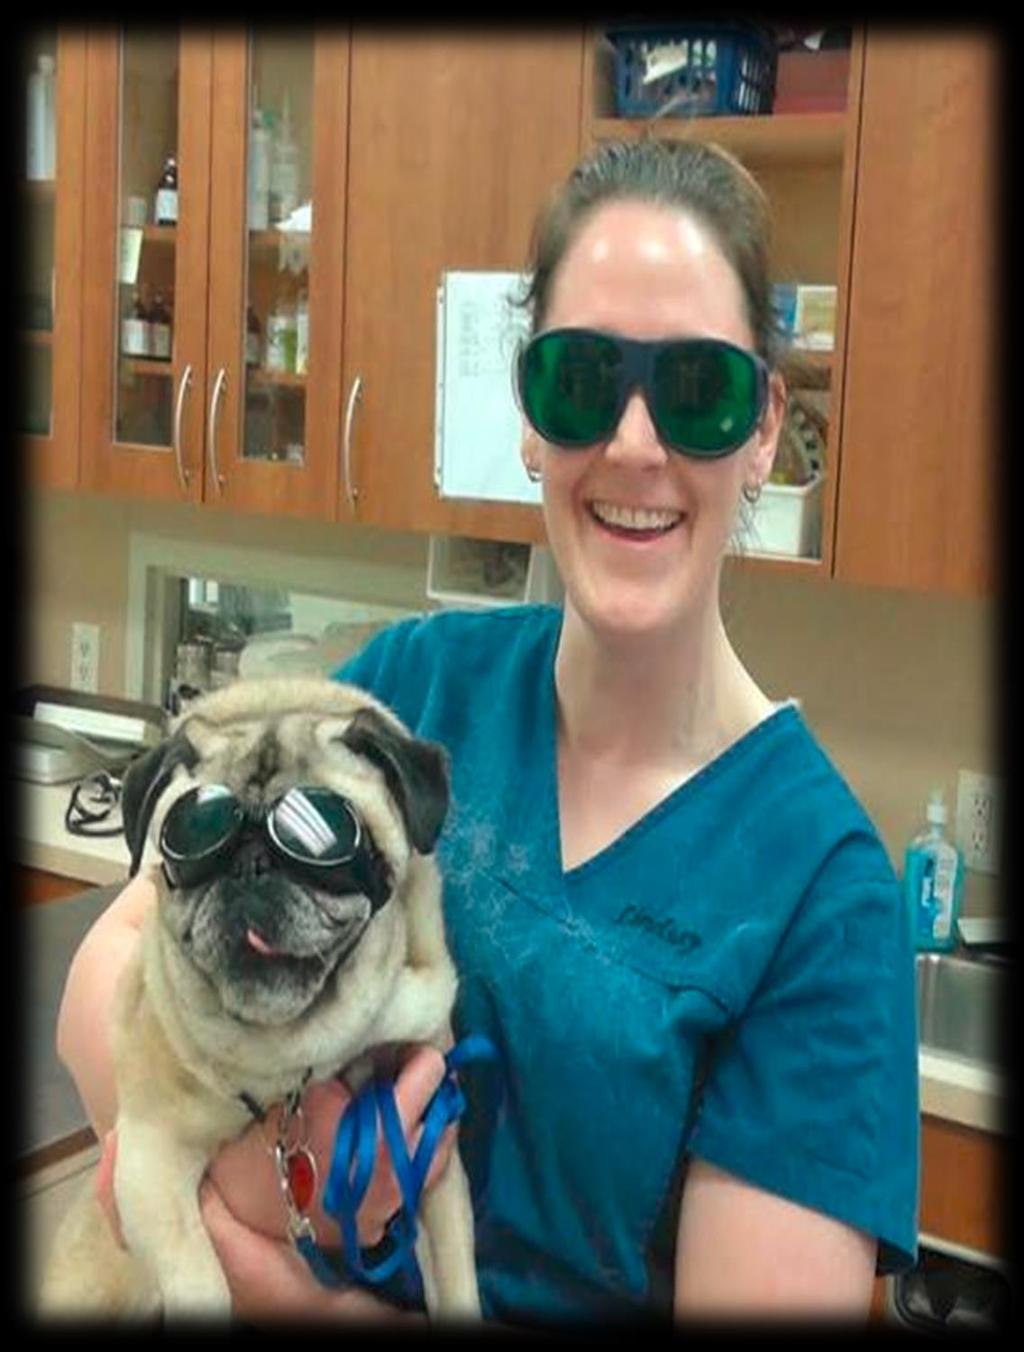 How can you get started with Laser Therapy?